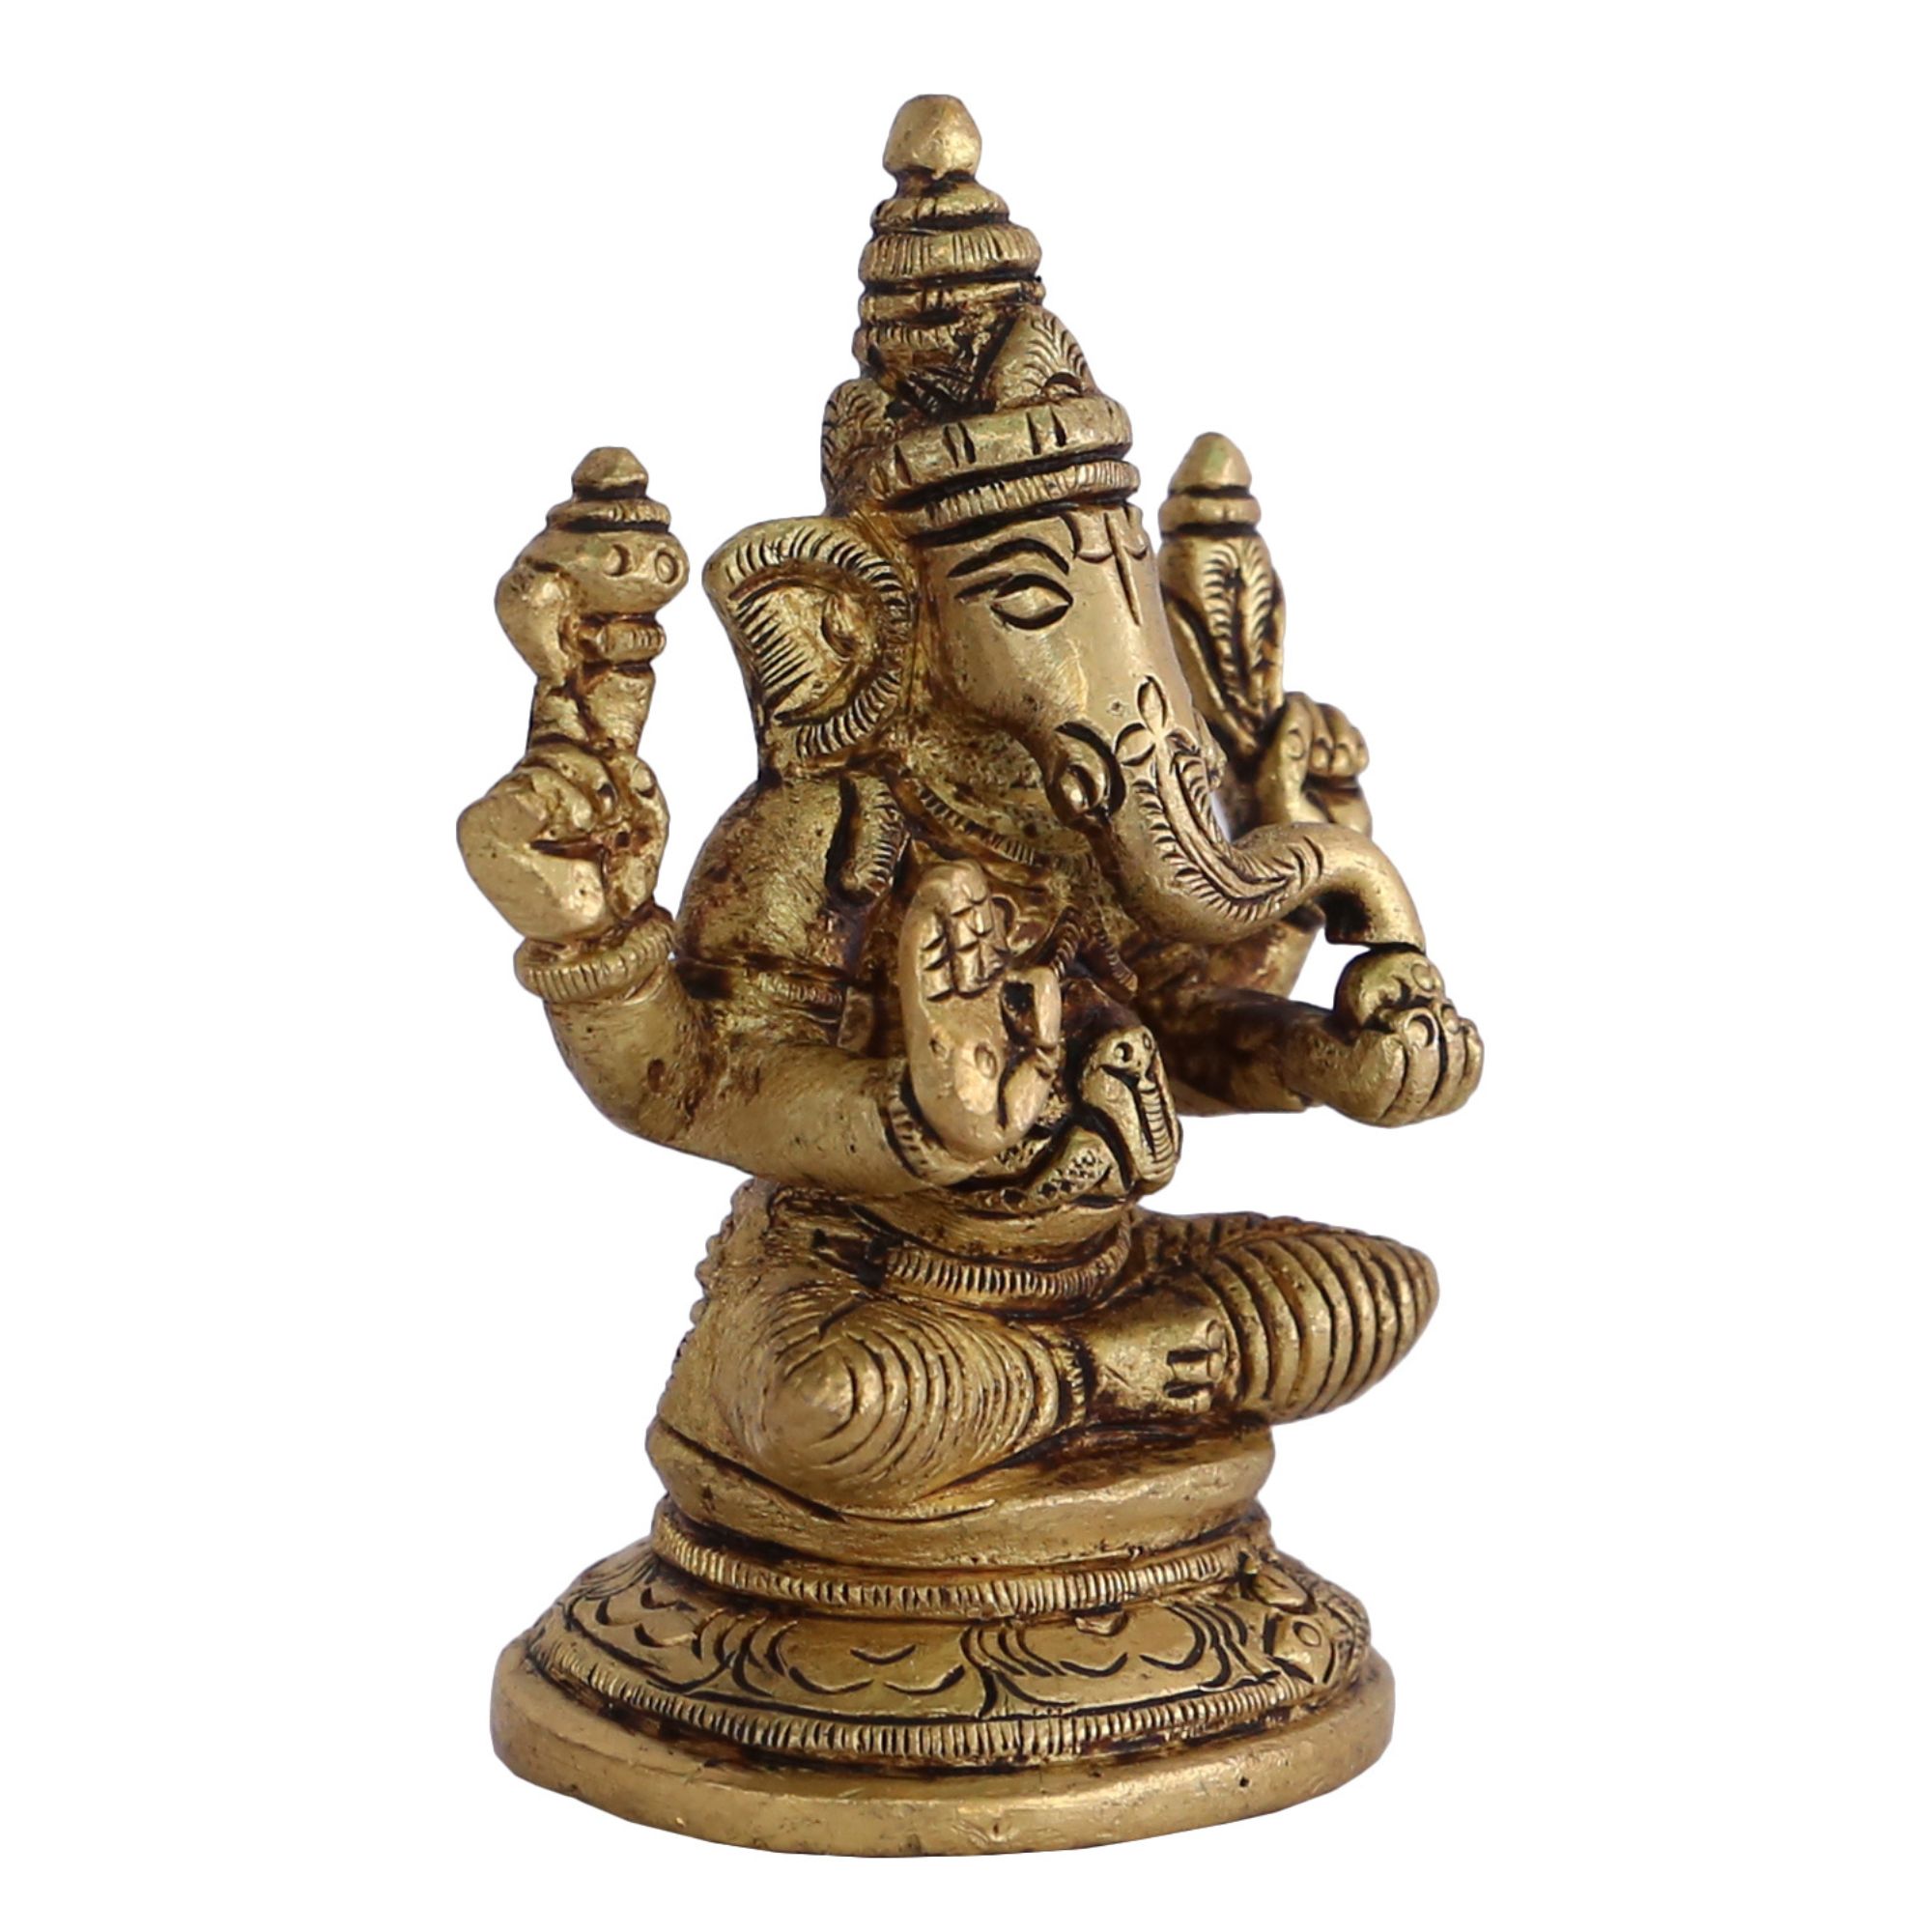 Lord Ganesha Made Soil Side Pose Stock Photo 2365415849 | Shutterstock